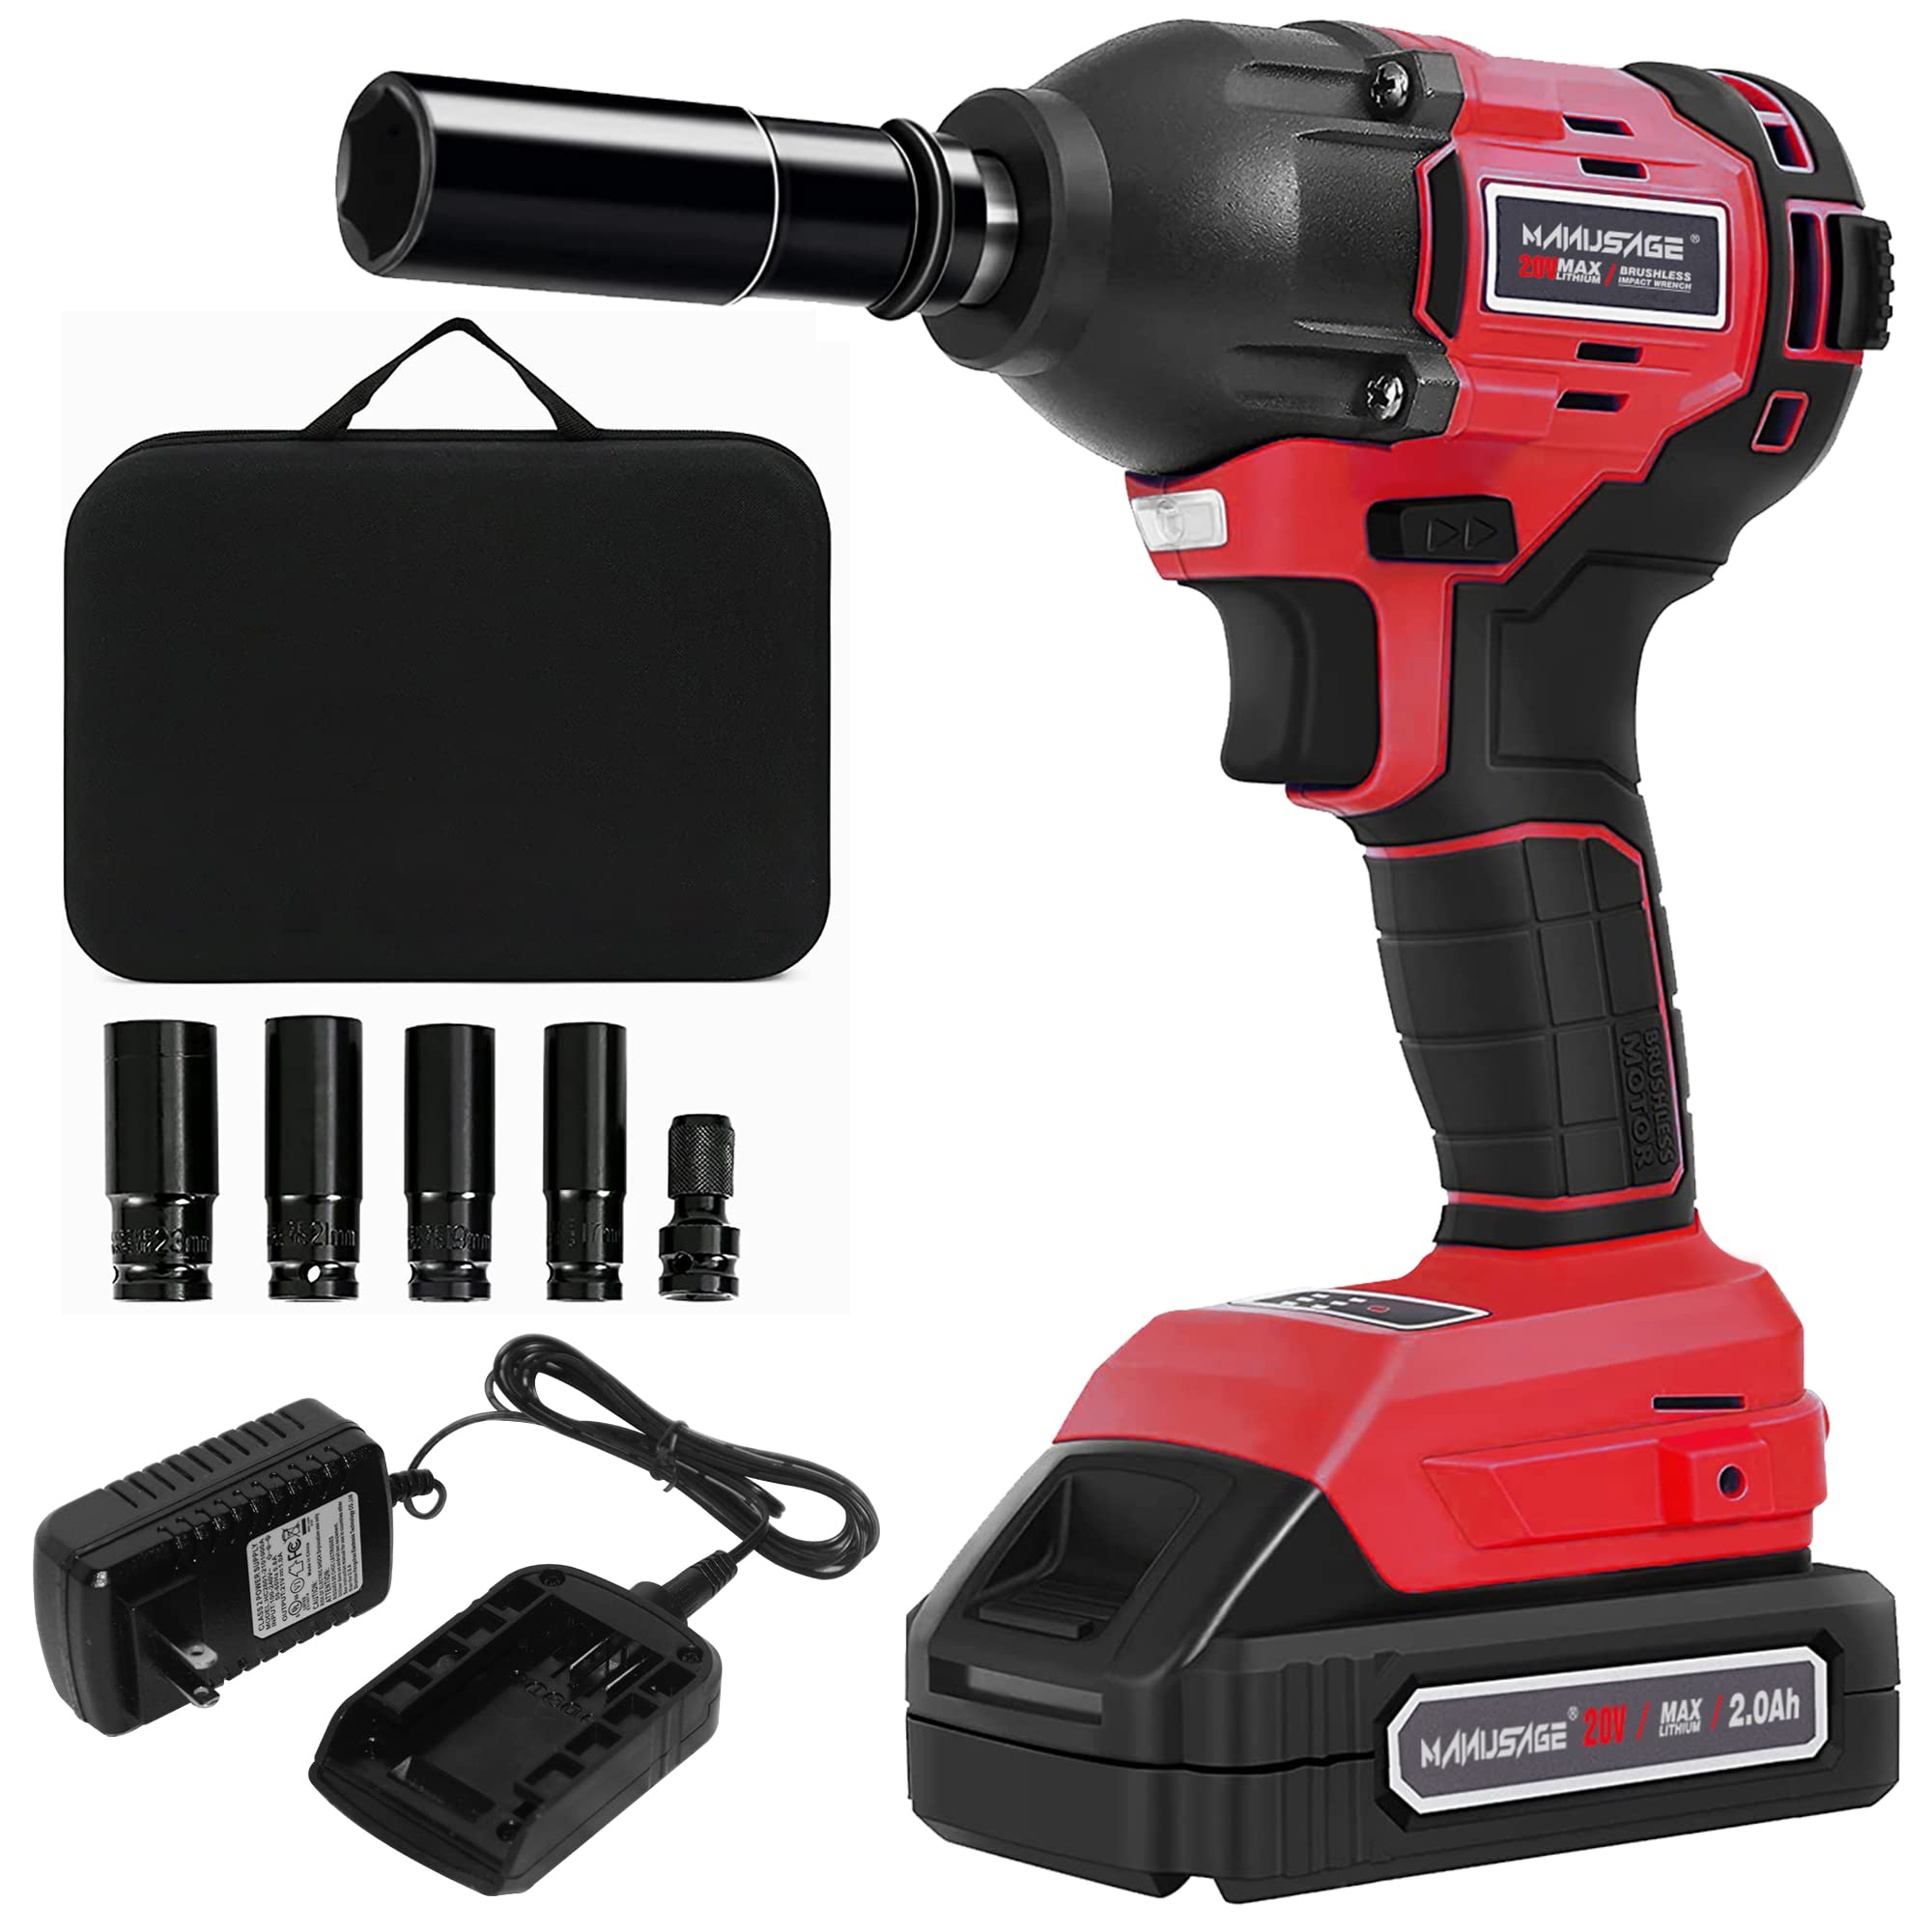 Manusage 20V Cordless Impact Wrench 12 inch Powerful Brushless Motor Max Torque 260 ft-lbs 2 Ah with 4-pcs Driver Impact